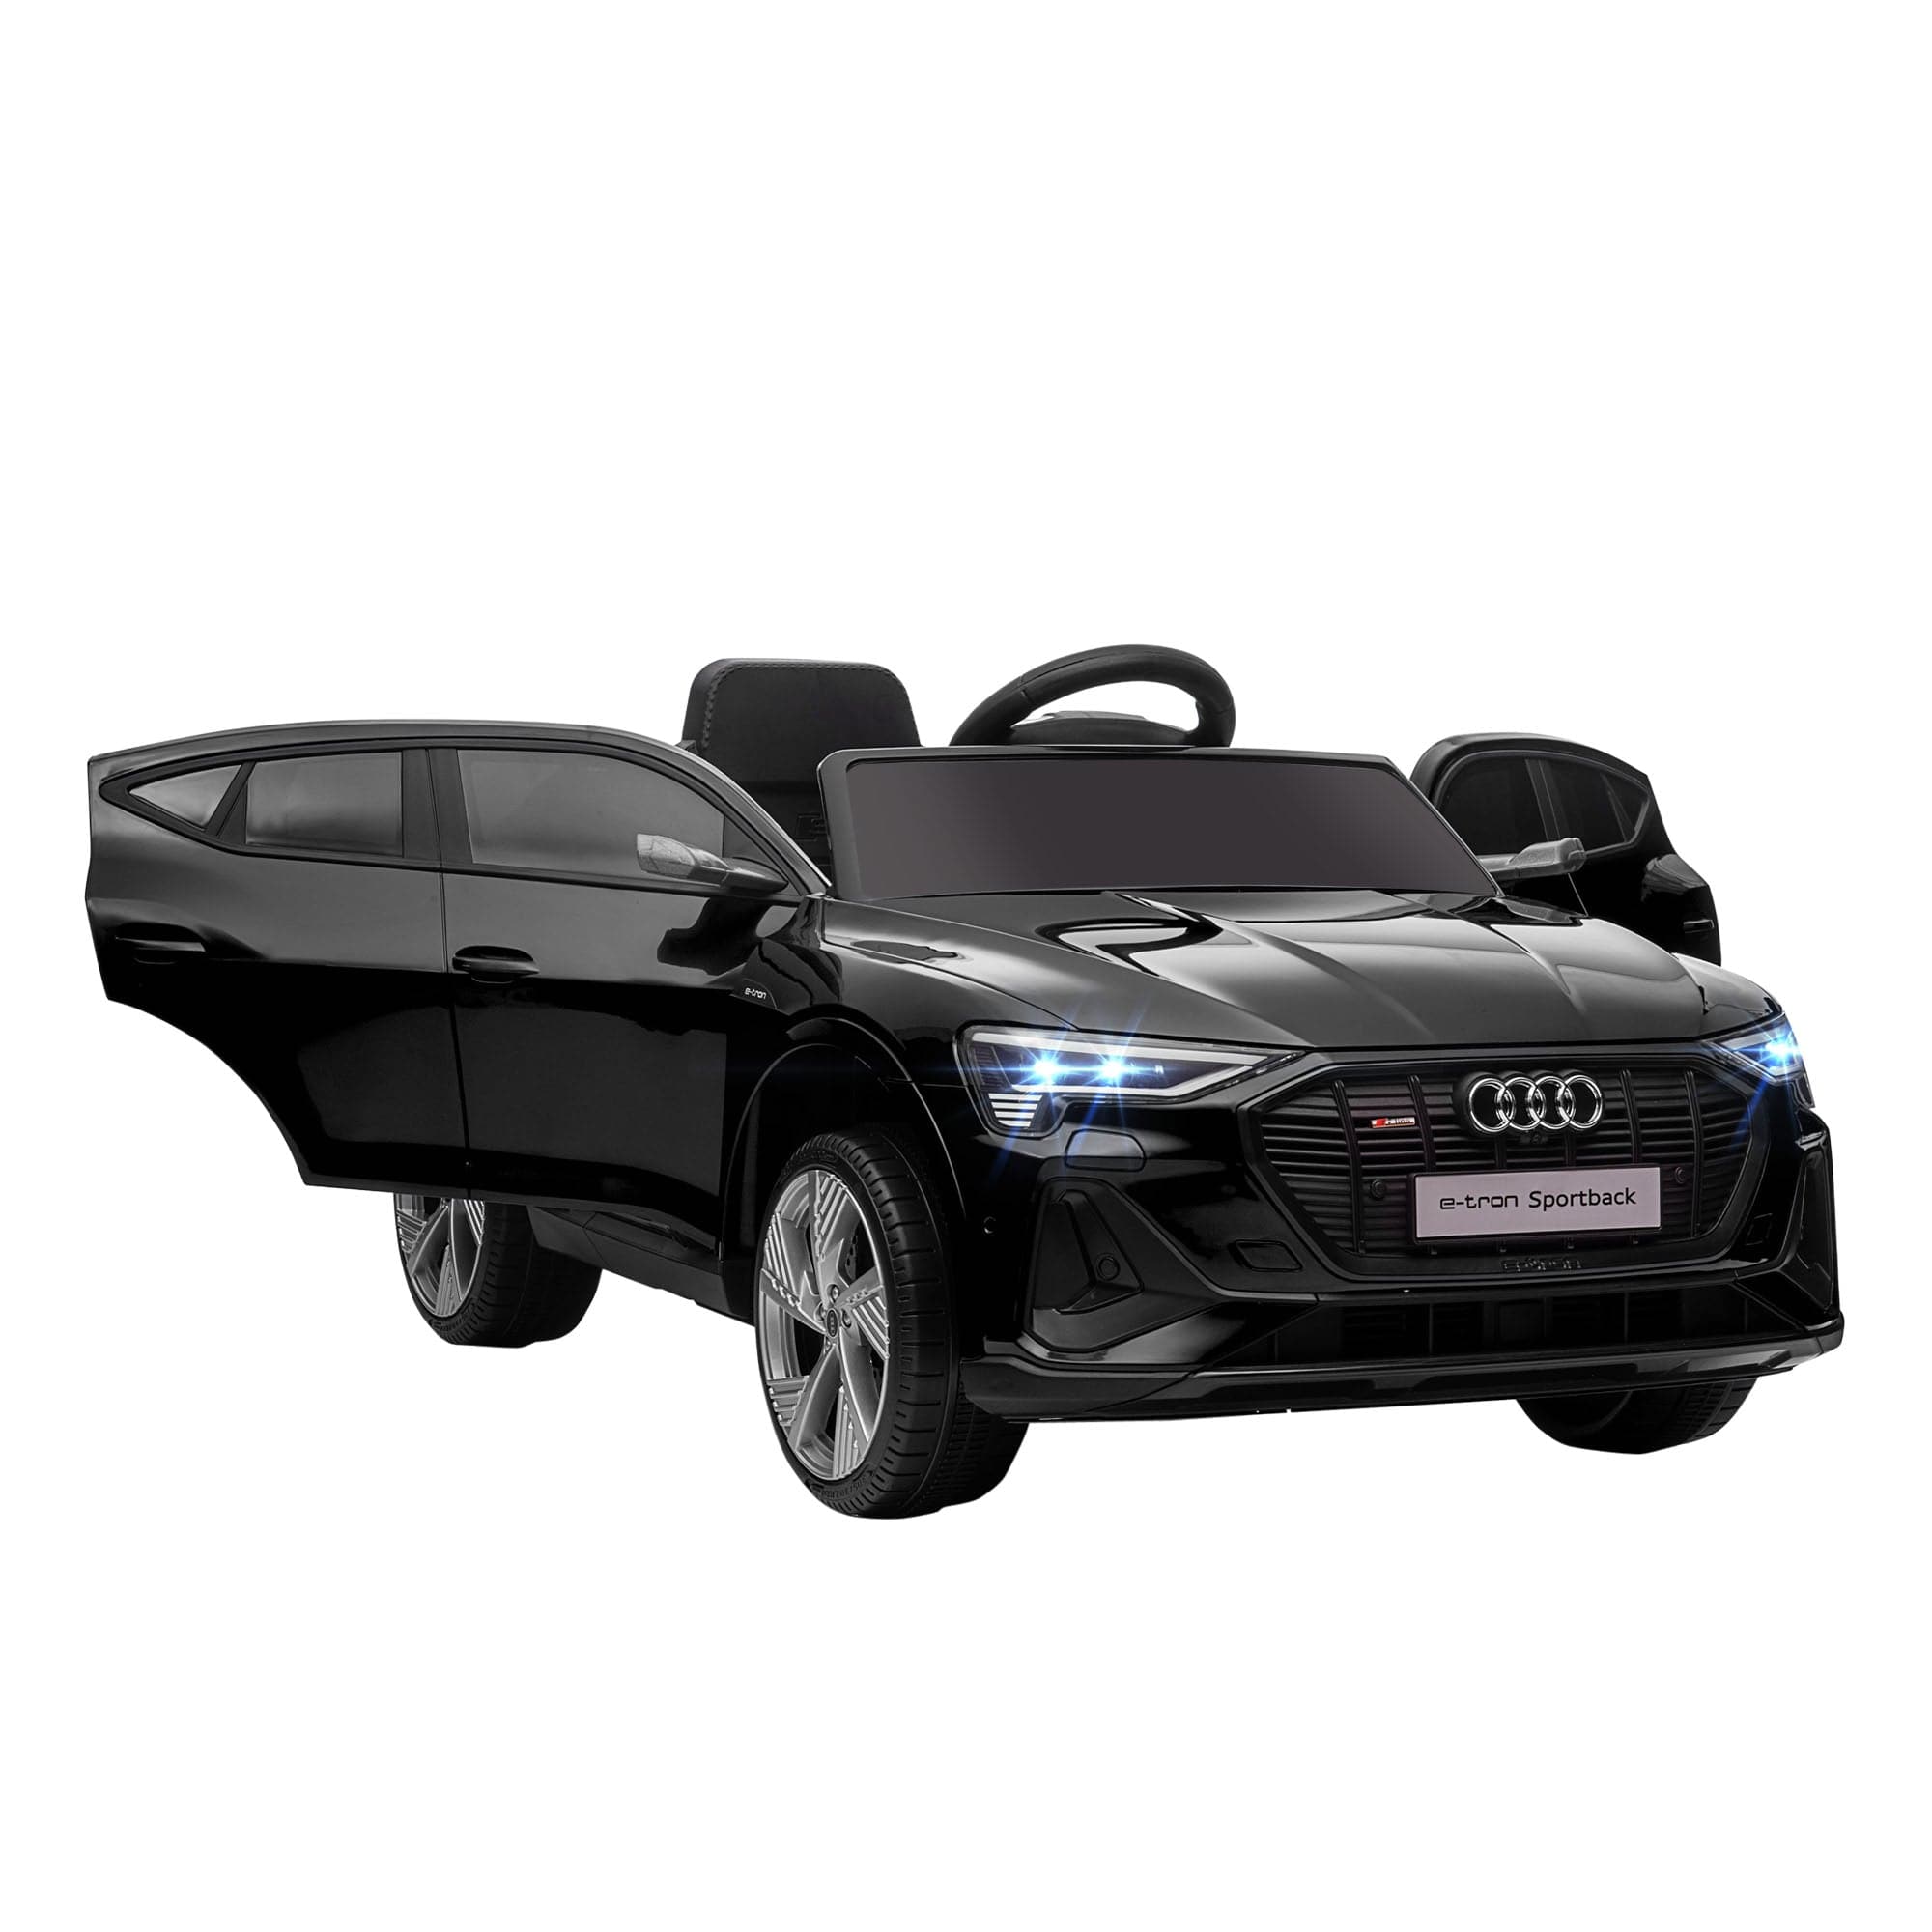 HOMCOM Audi E-tron Licensed 12V Kids Electric Ride On Car with Remote, Music, Lights & Suspension for 3-5 Years (Black)